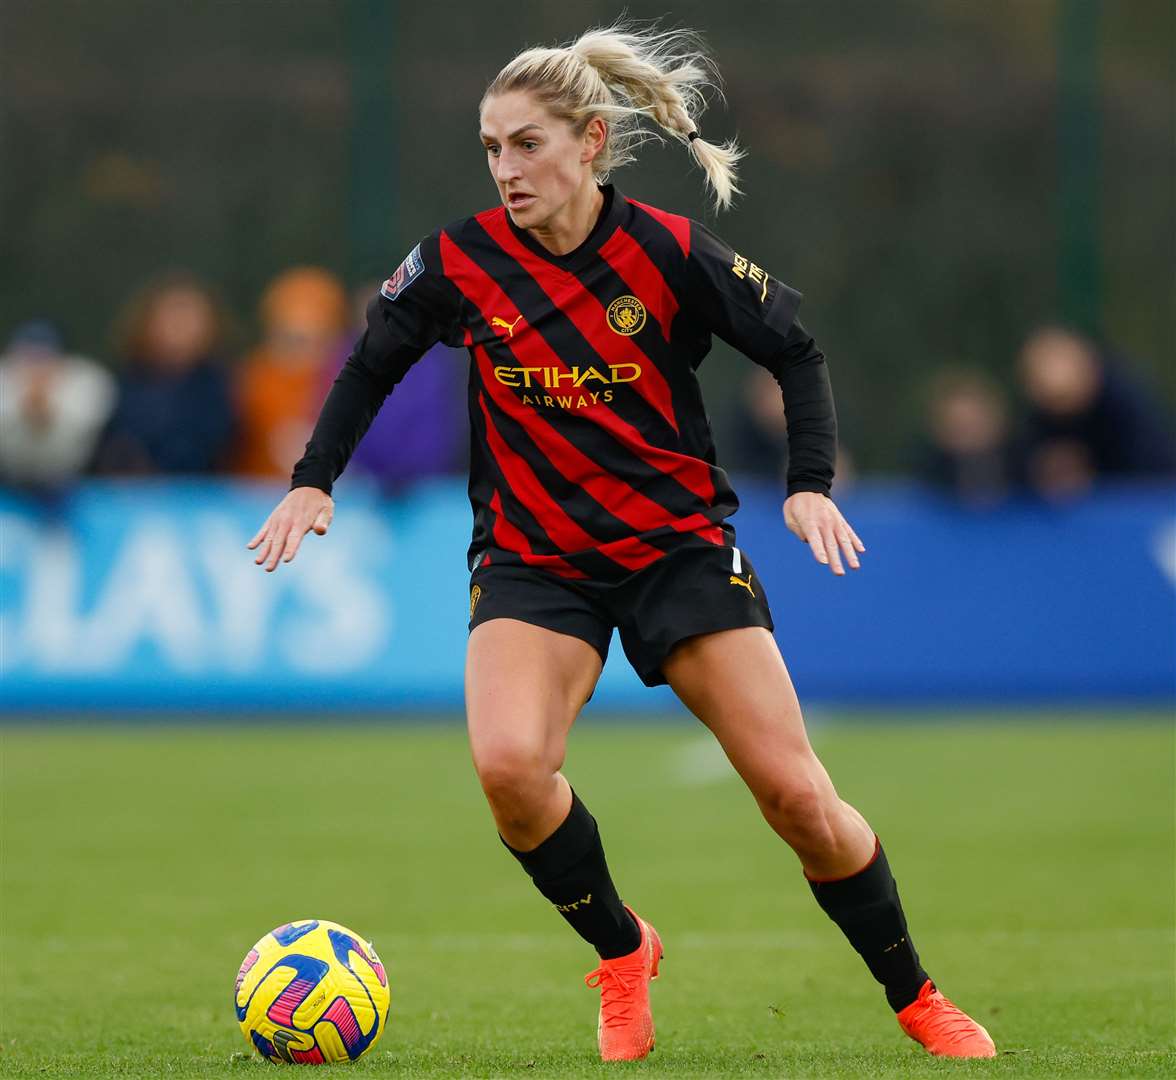 Manchester City's Laura Coombs has excelled in the WSL this season. Picture: Manchester City FC